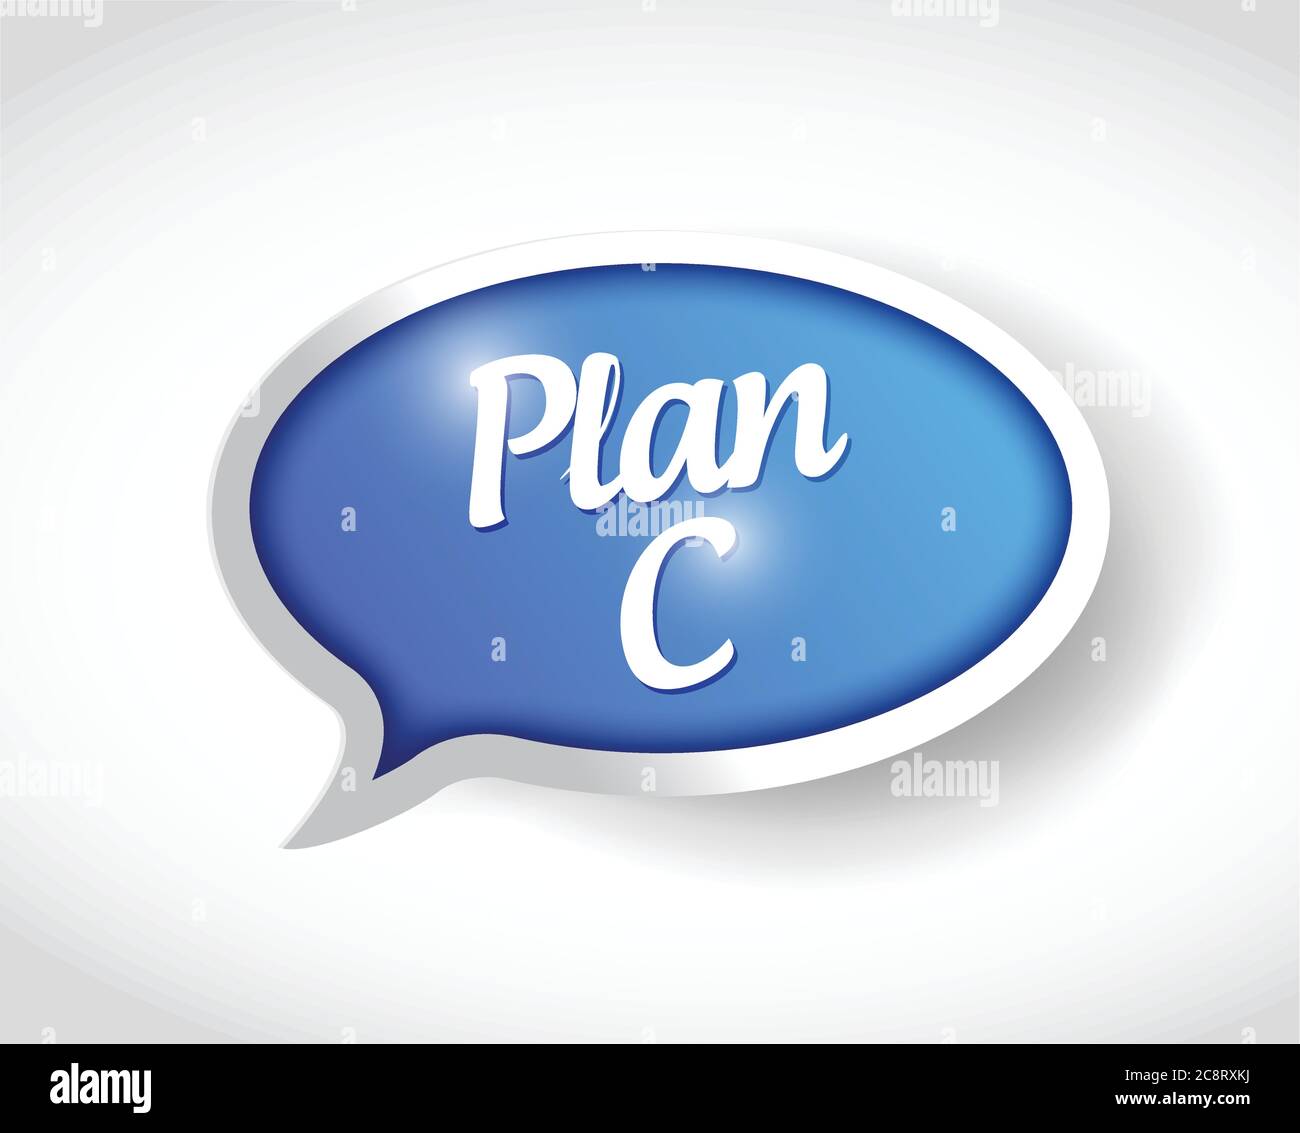 Plan c message bubble illustration design over a white background Stock Vector